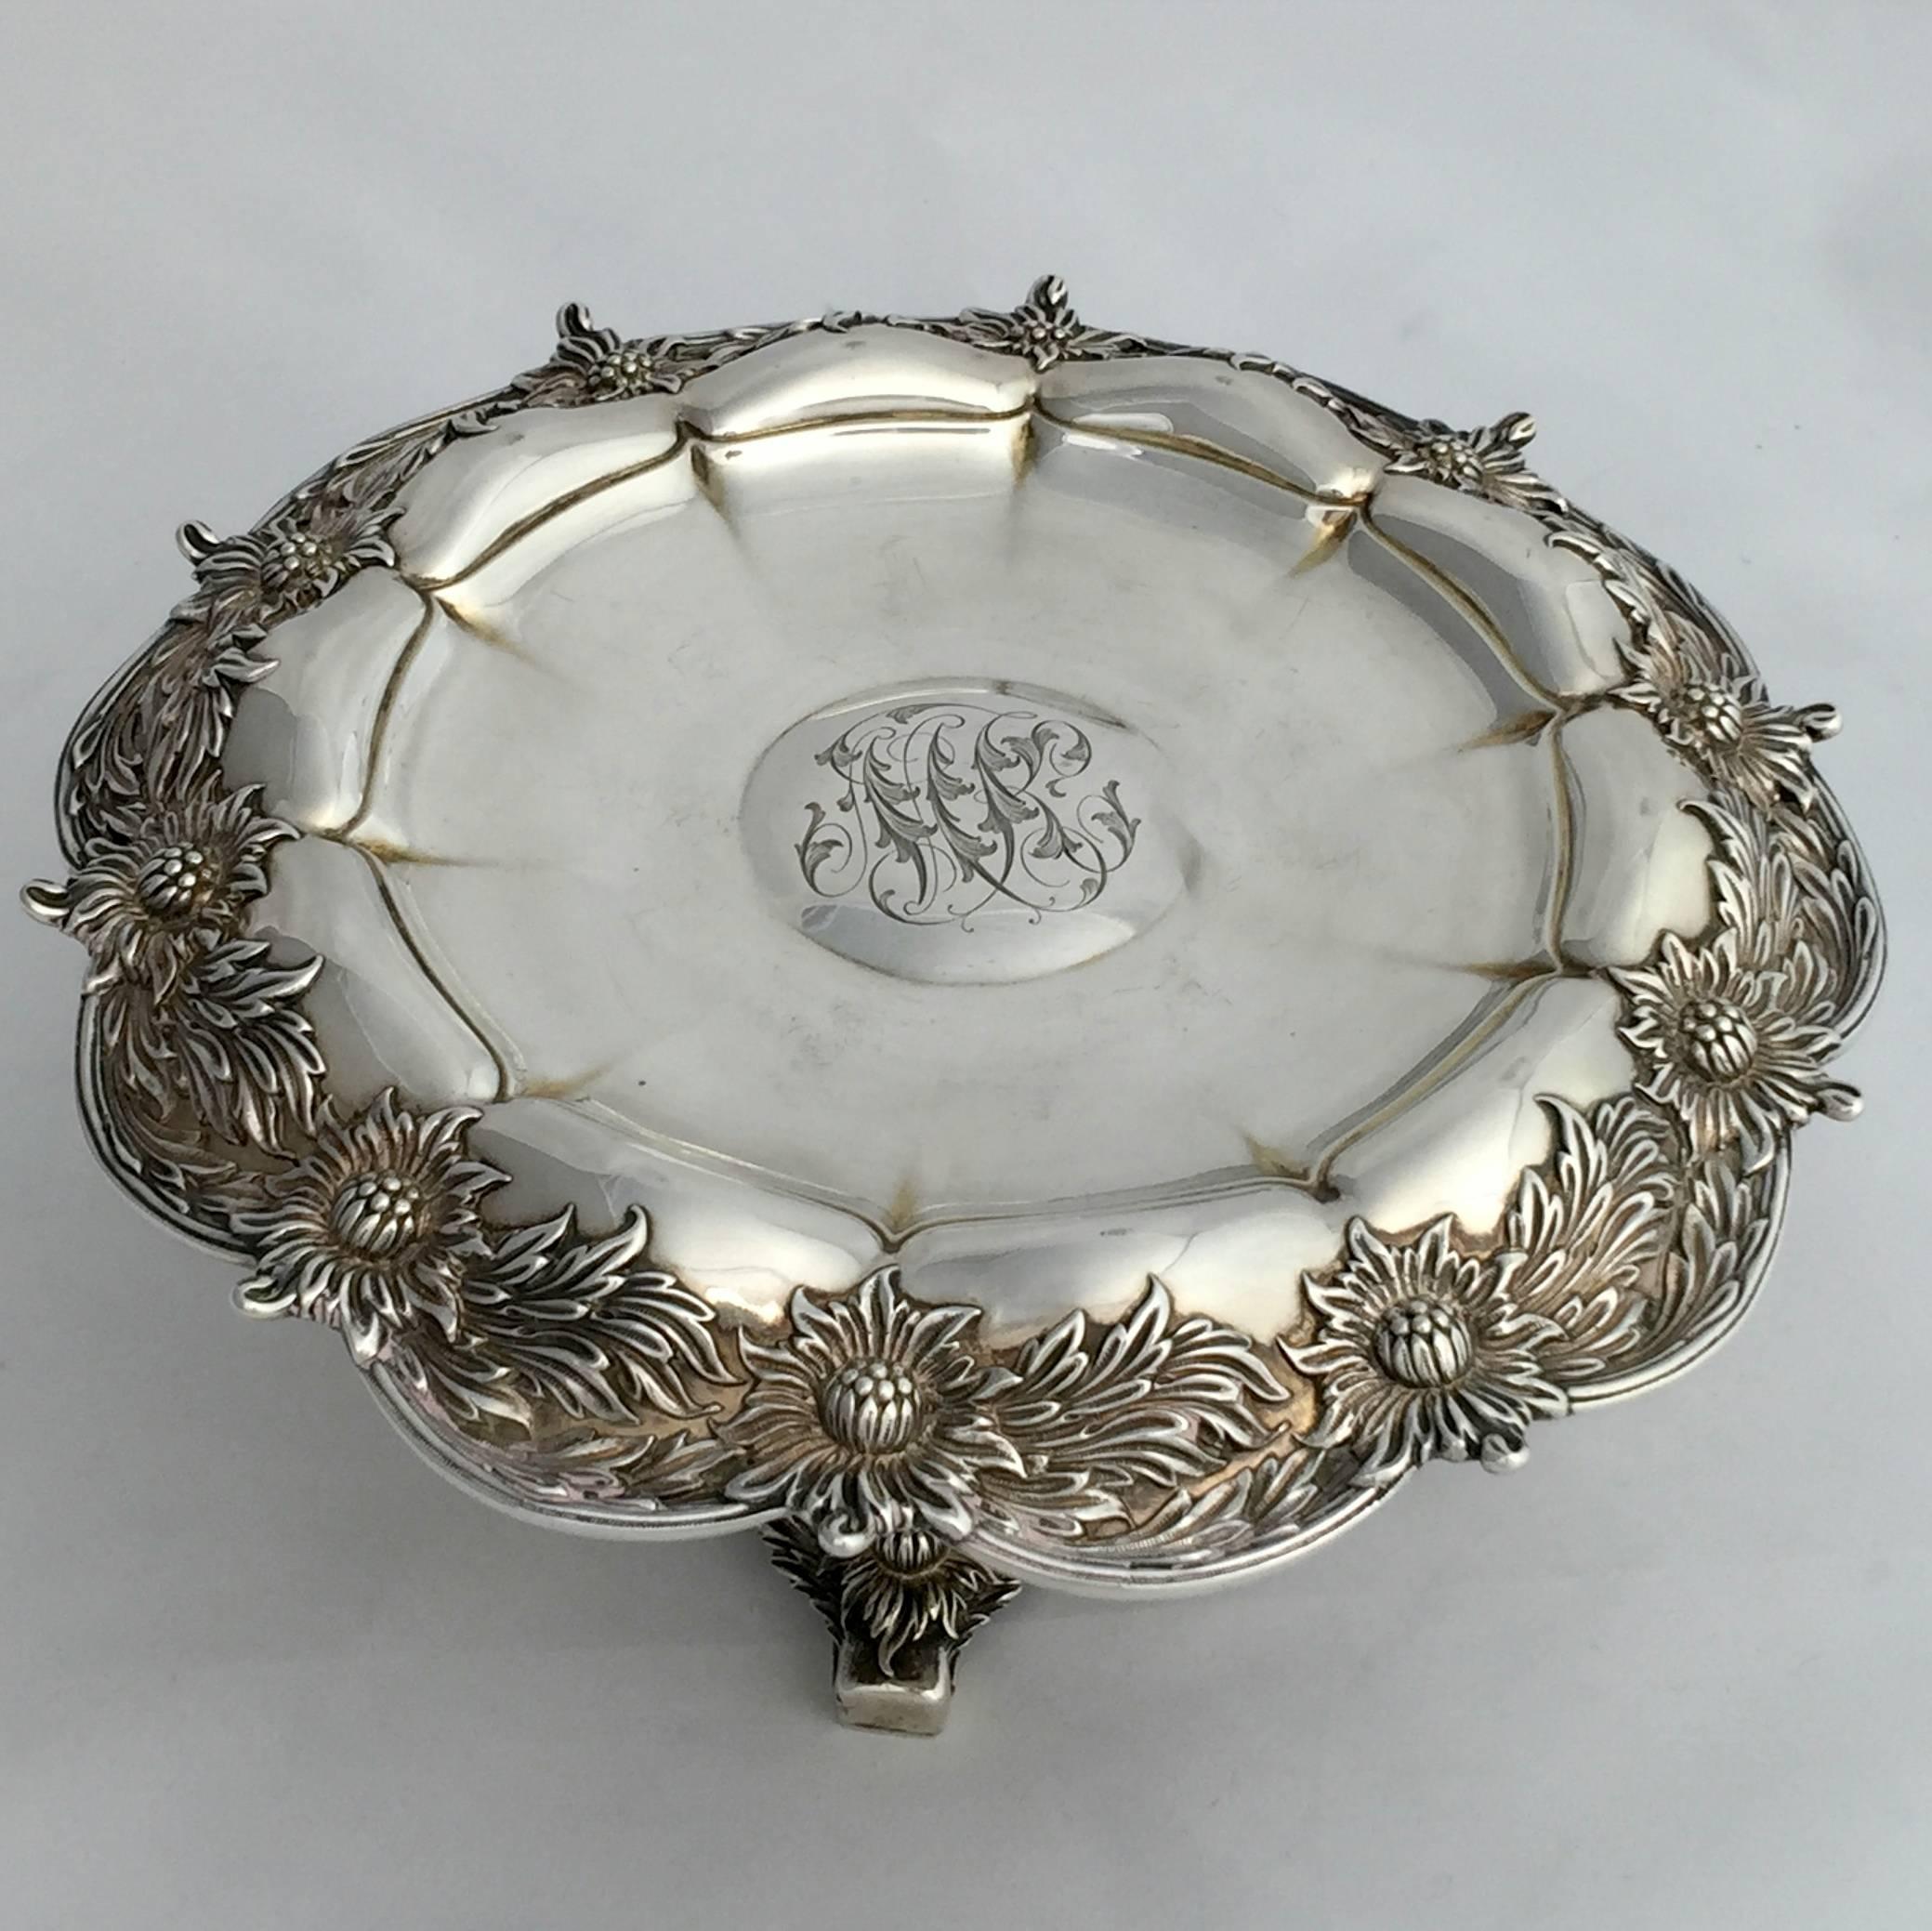 Silver Pair of Fine Early 20th Century Tiffany Tazzas in the Chrysanthemum Pattern